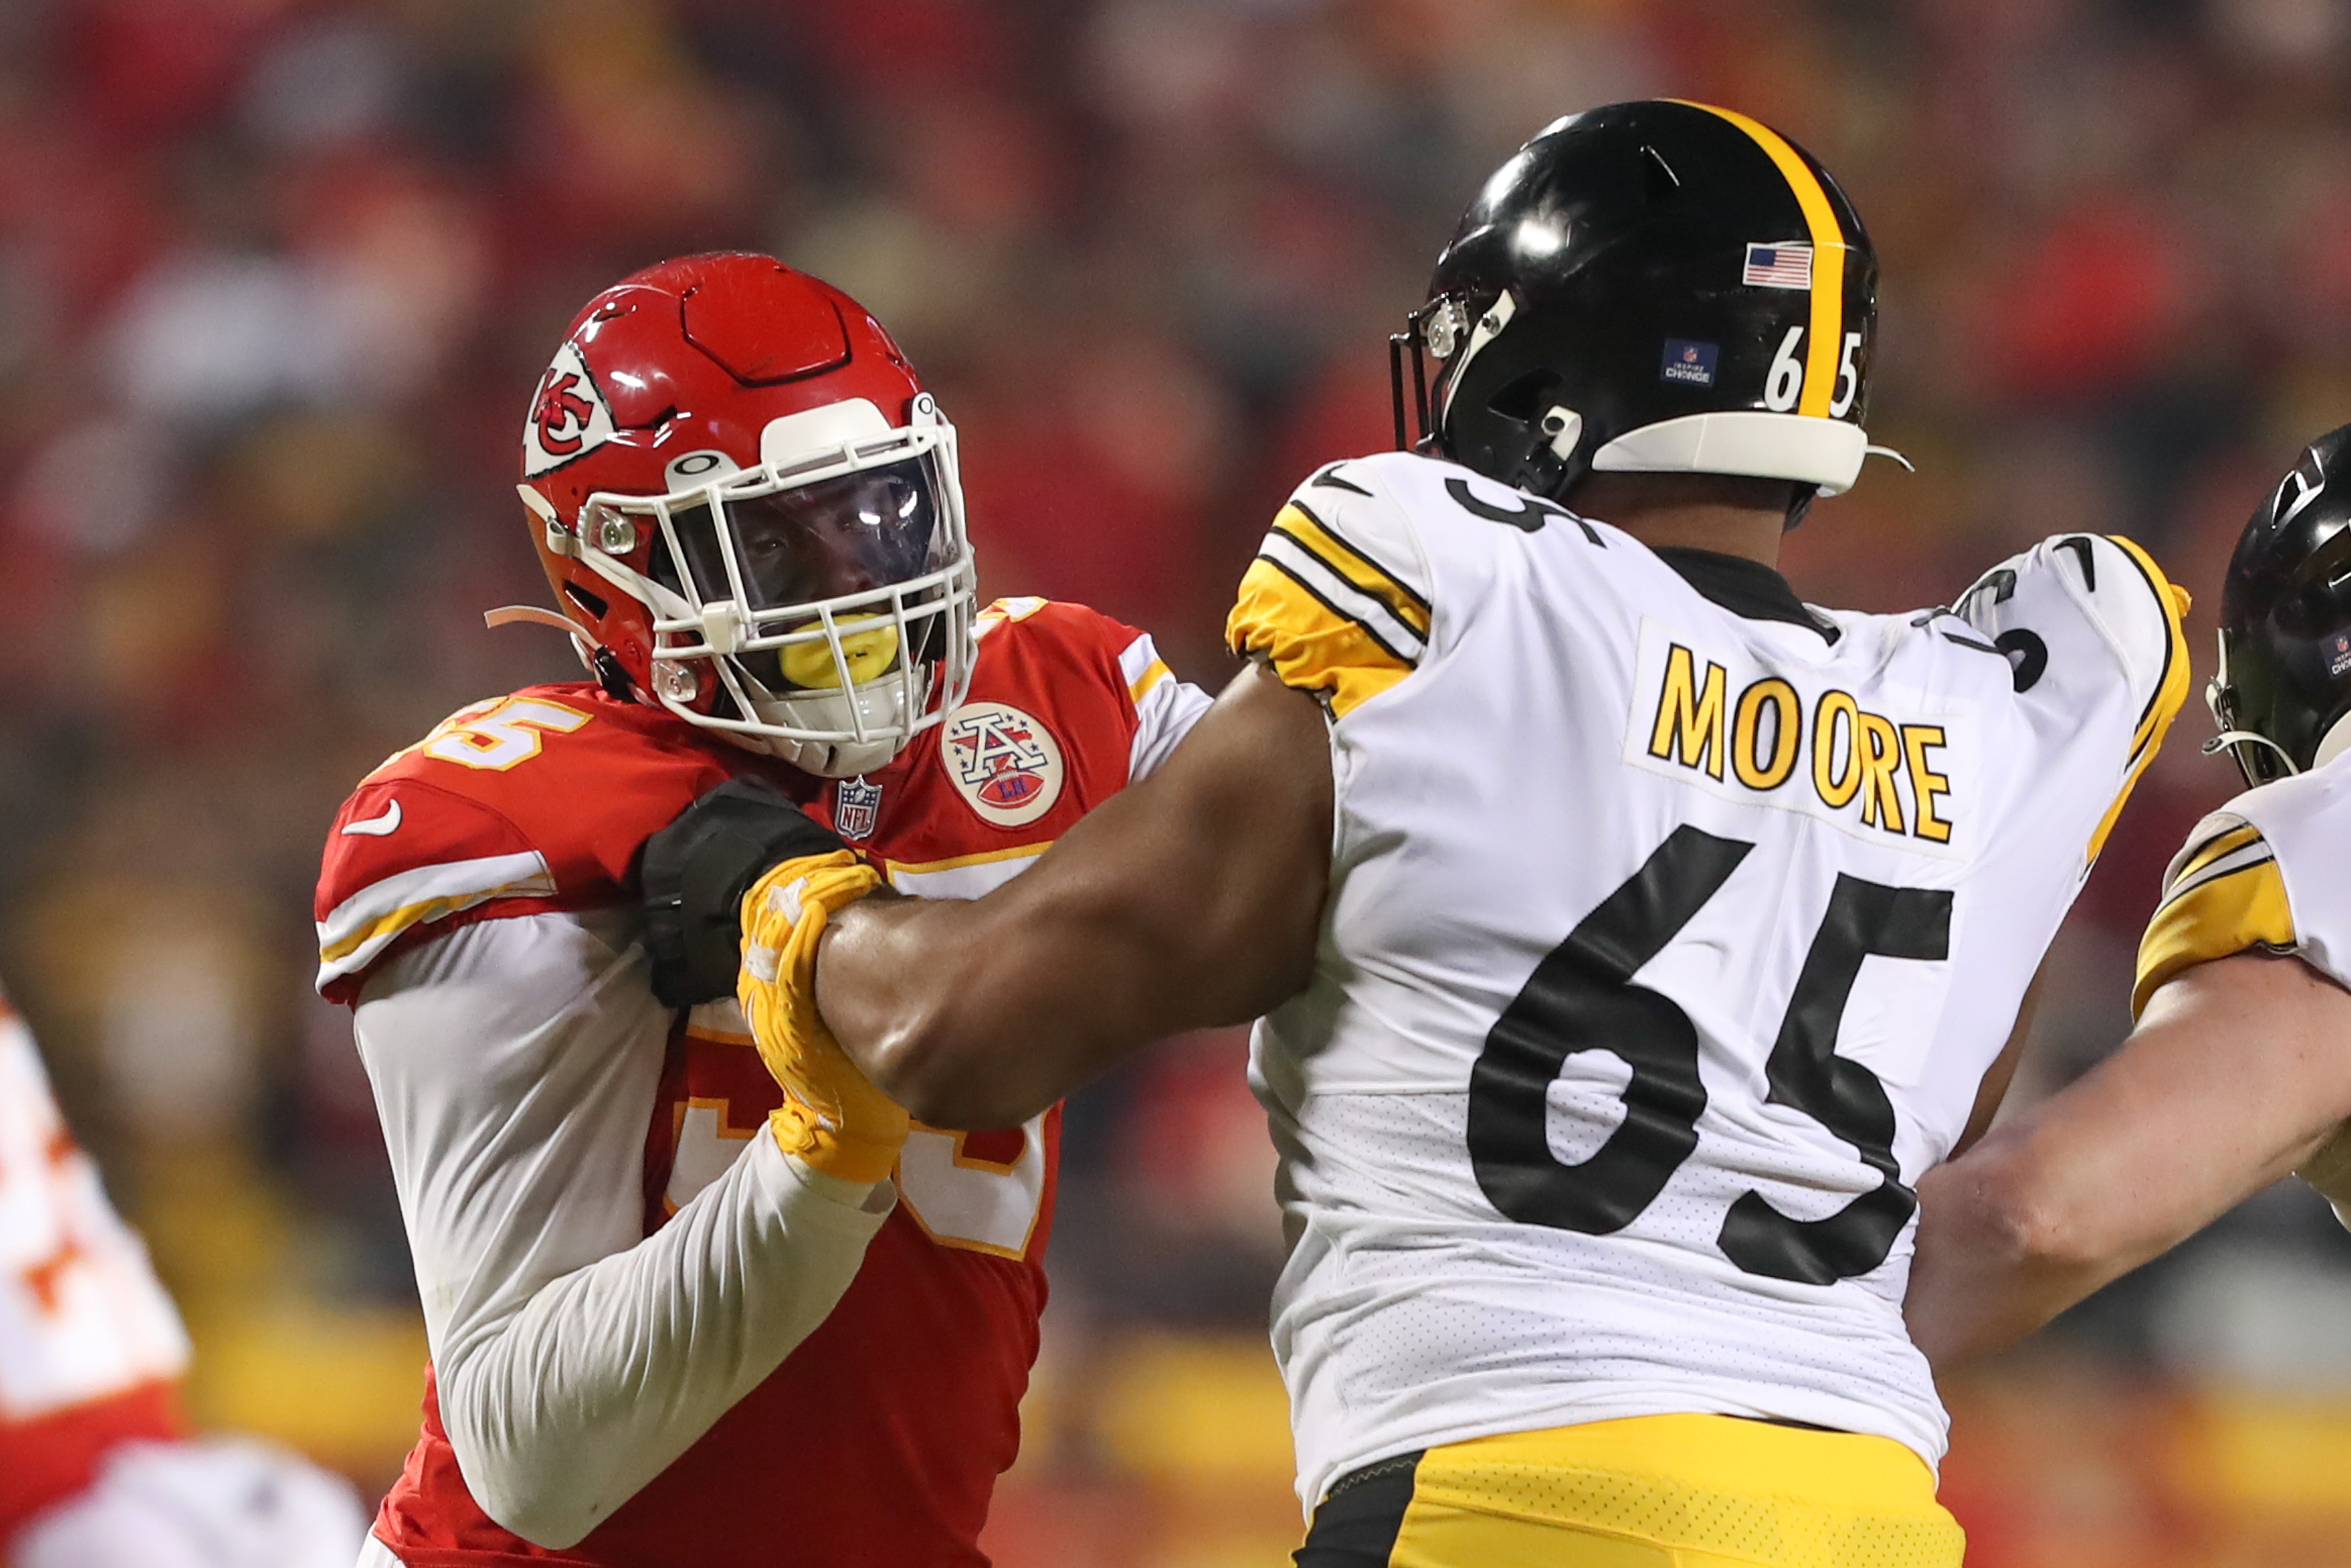 NFL: JAN 16 AFC Wild Card - Steelers at Chiefs